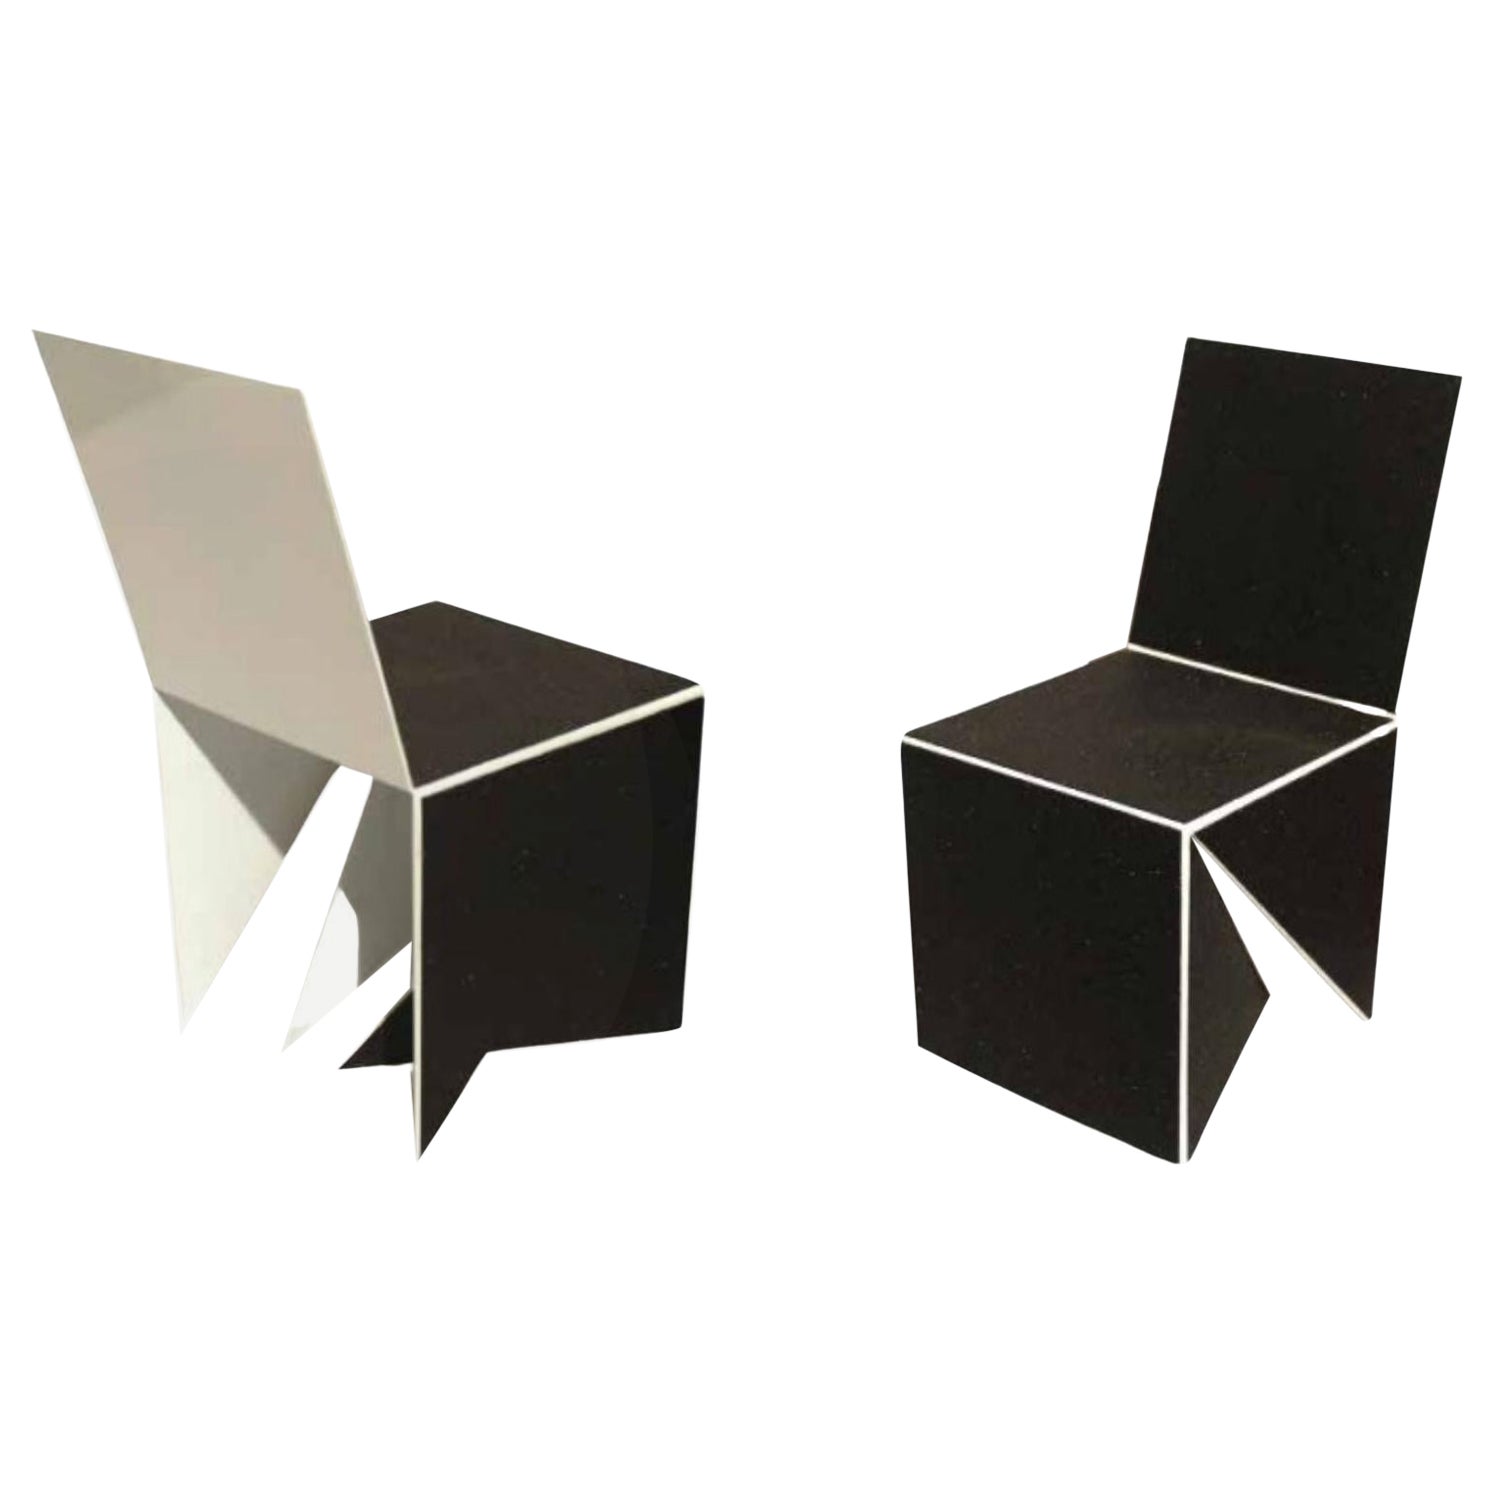 Set of 2 Casulo Cubes #2 by Mameluca